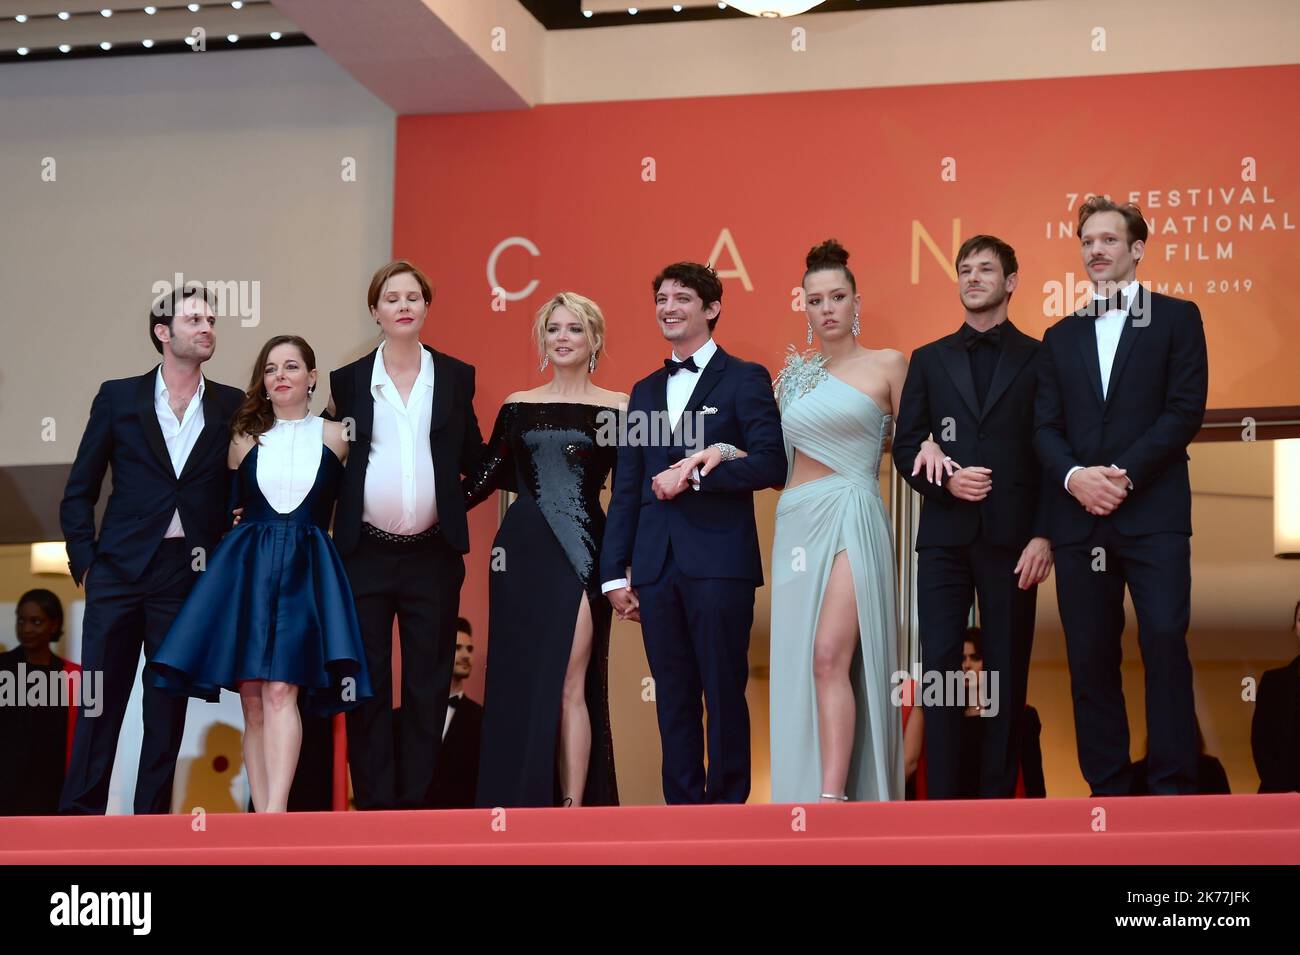 Arthur Harari, Laure Calamy, Justine Triet, Virginie Efira, Niels Schneider, Adele Exarchopoulos, Gaspard Ulliel and Paul Hamy attend the screening of Sibyl during the 72nd annual Cannes Film Festival on May 24, 2019 in Cannes, France. Stock Photo